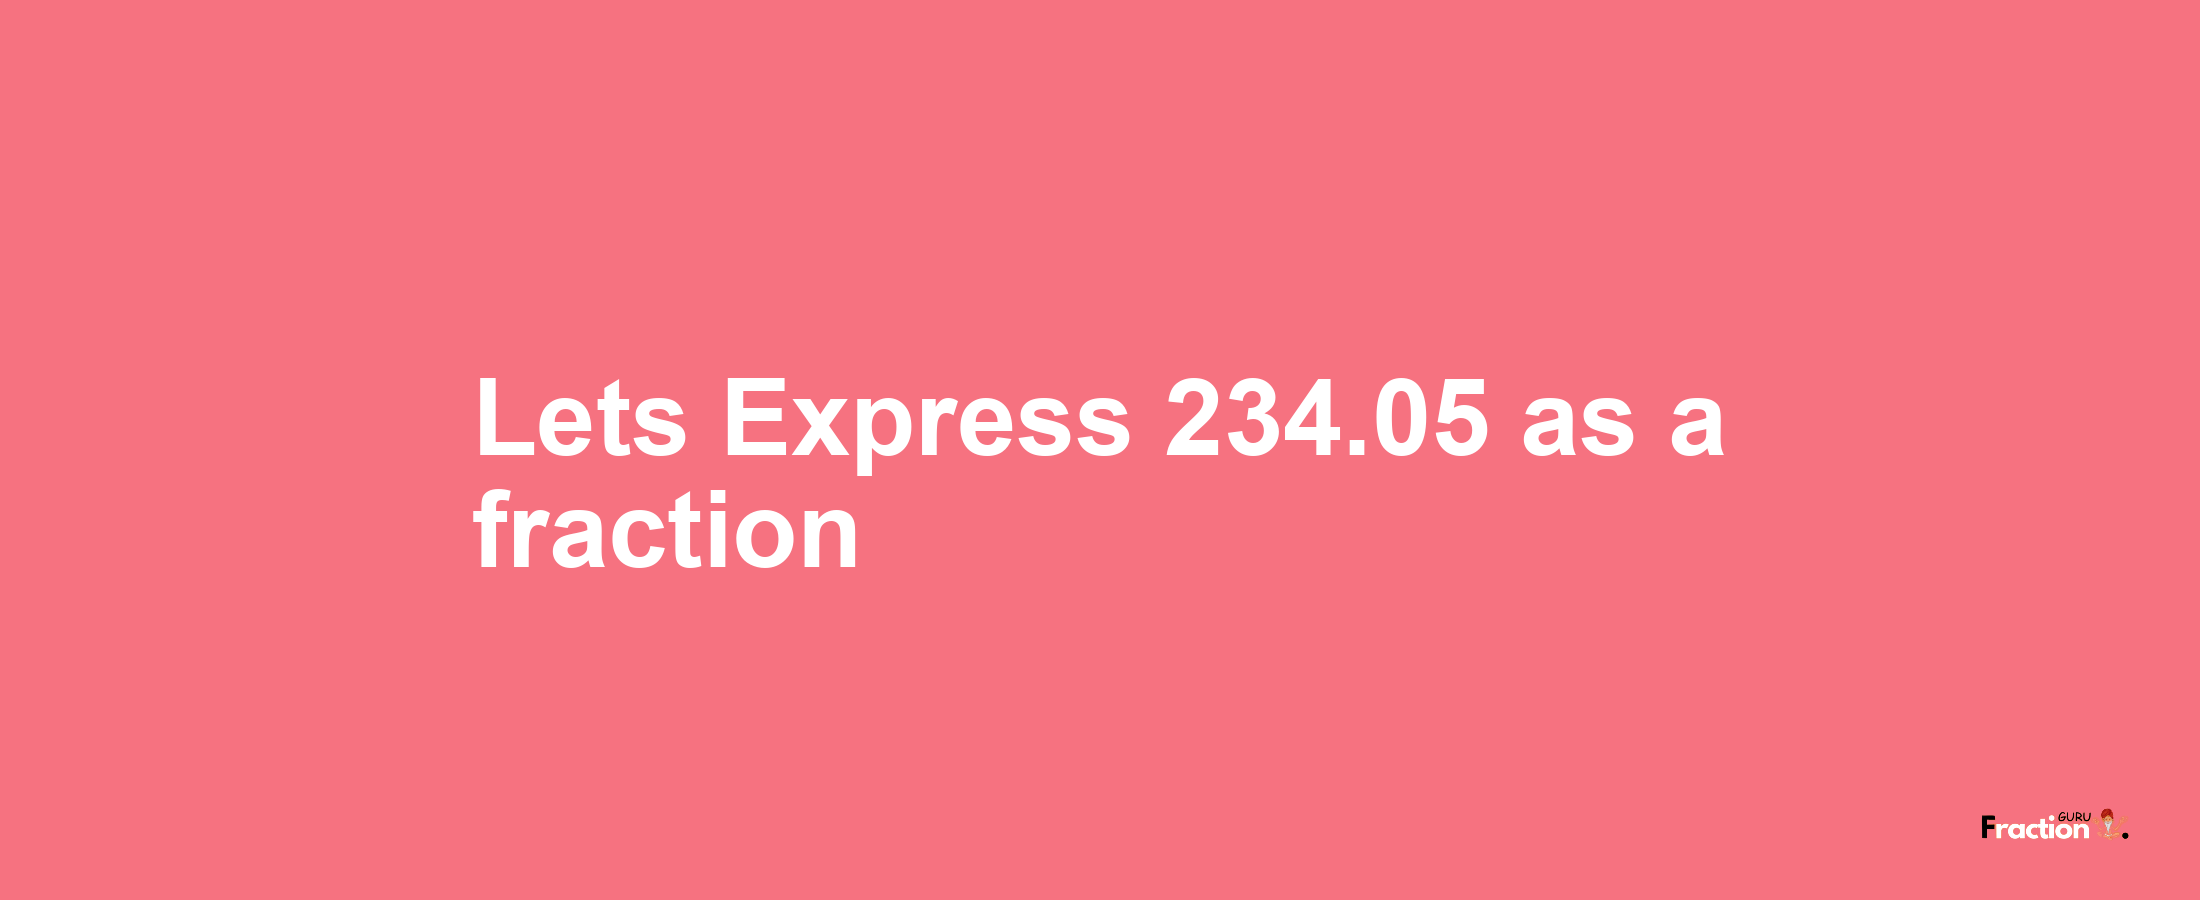 Lets Express 234.05 as afraction